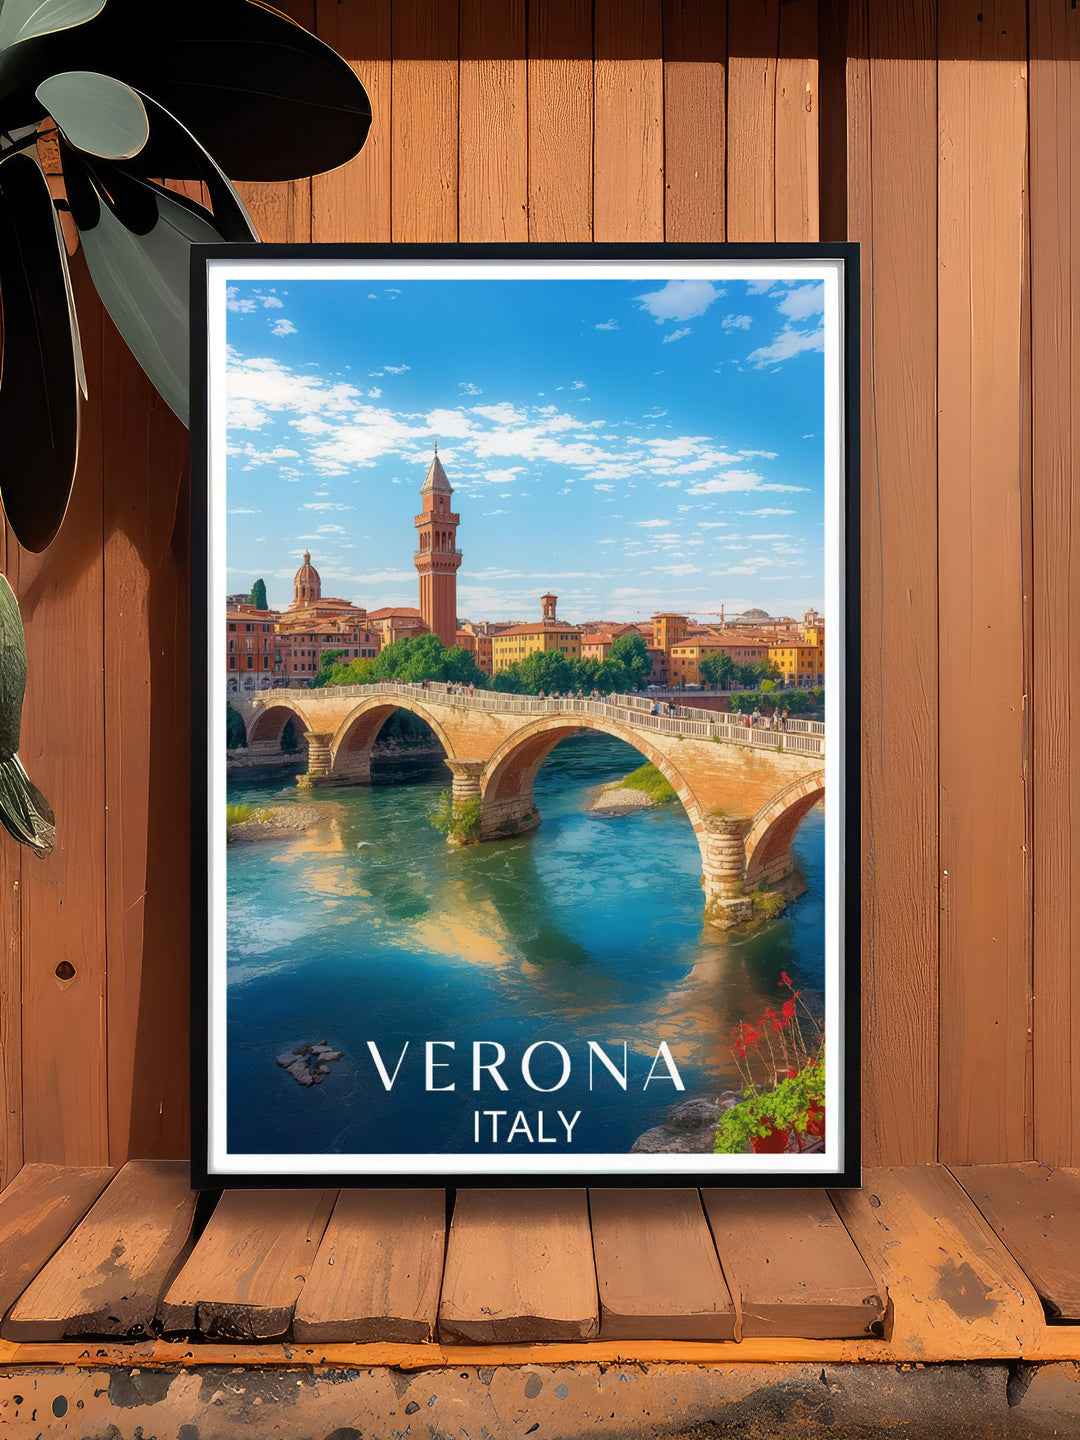 Detailed Verona poster featuring Ponte Pietra offering a glimpse into the rich cultural heritage of Italy perfect for enhancing any wall with the elegance and historical significance of this ancient Roman bridge.